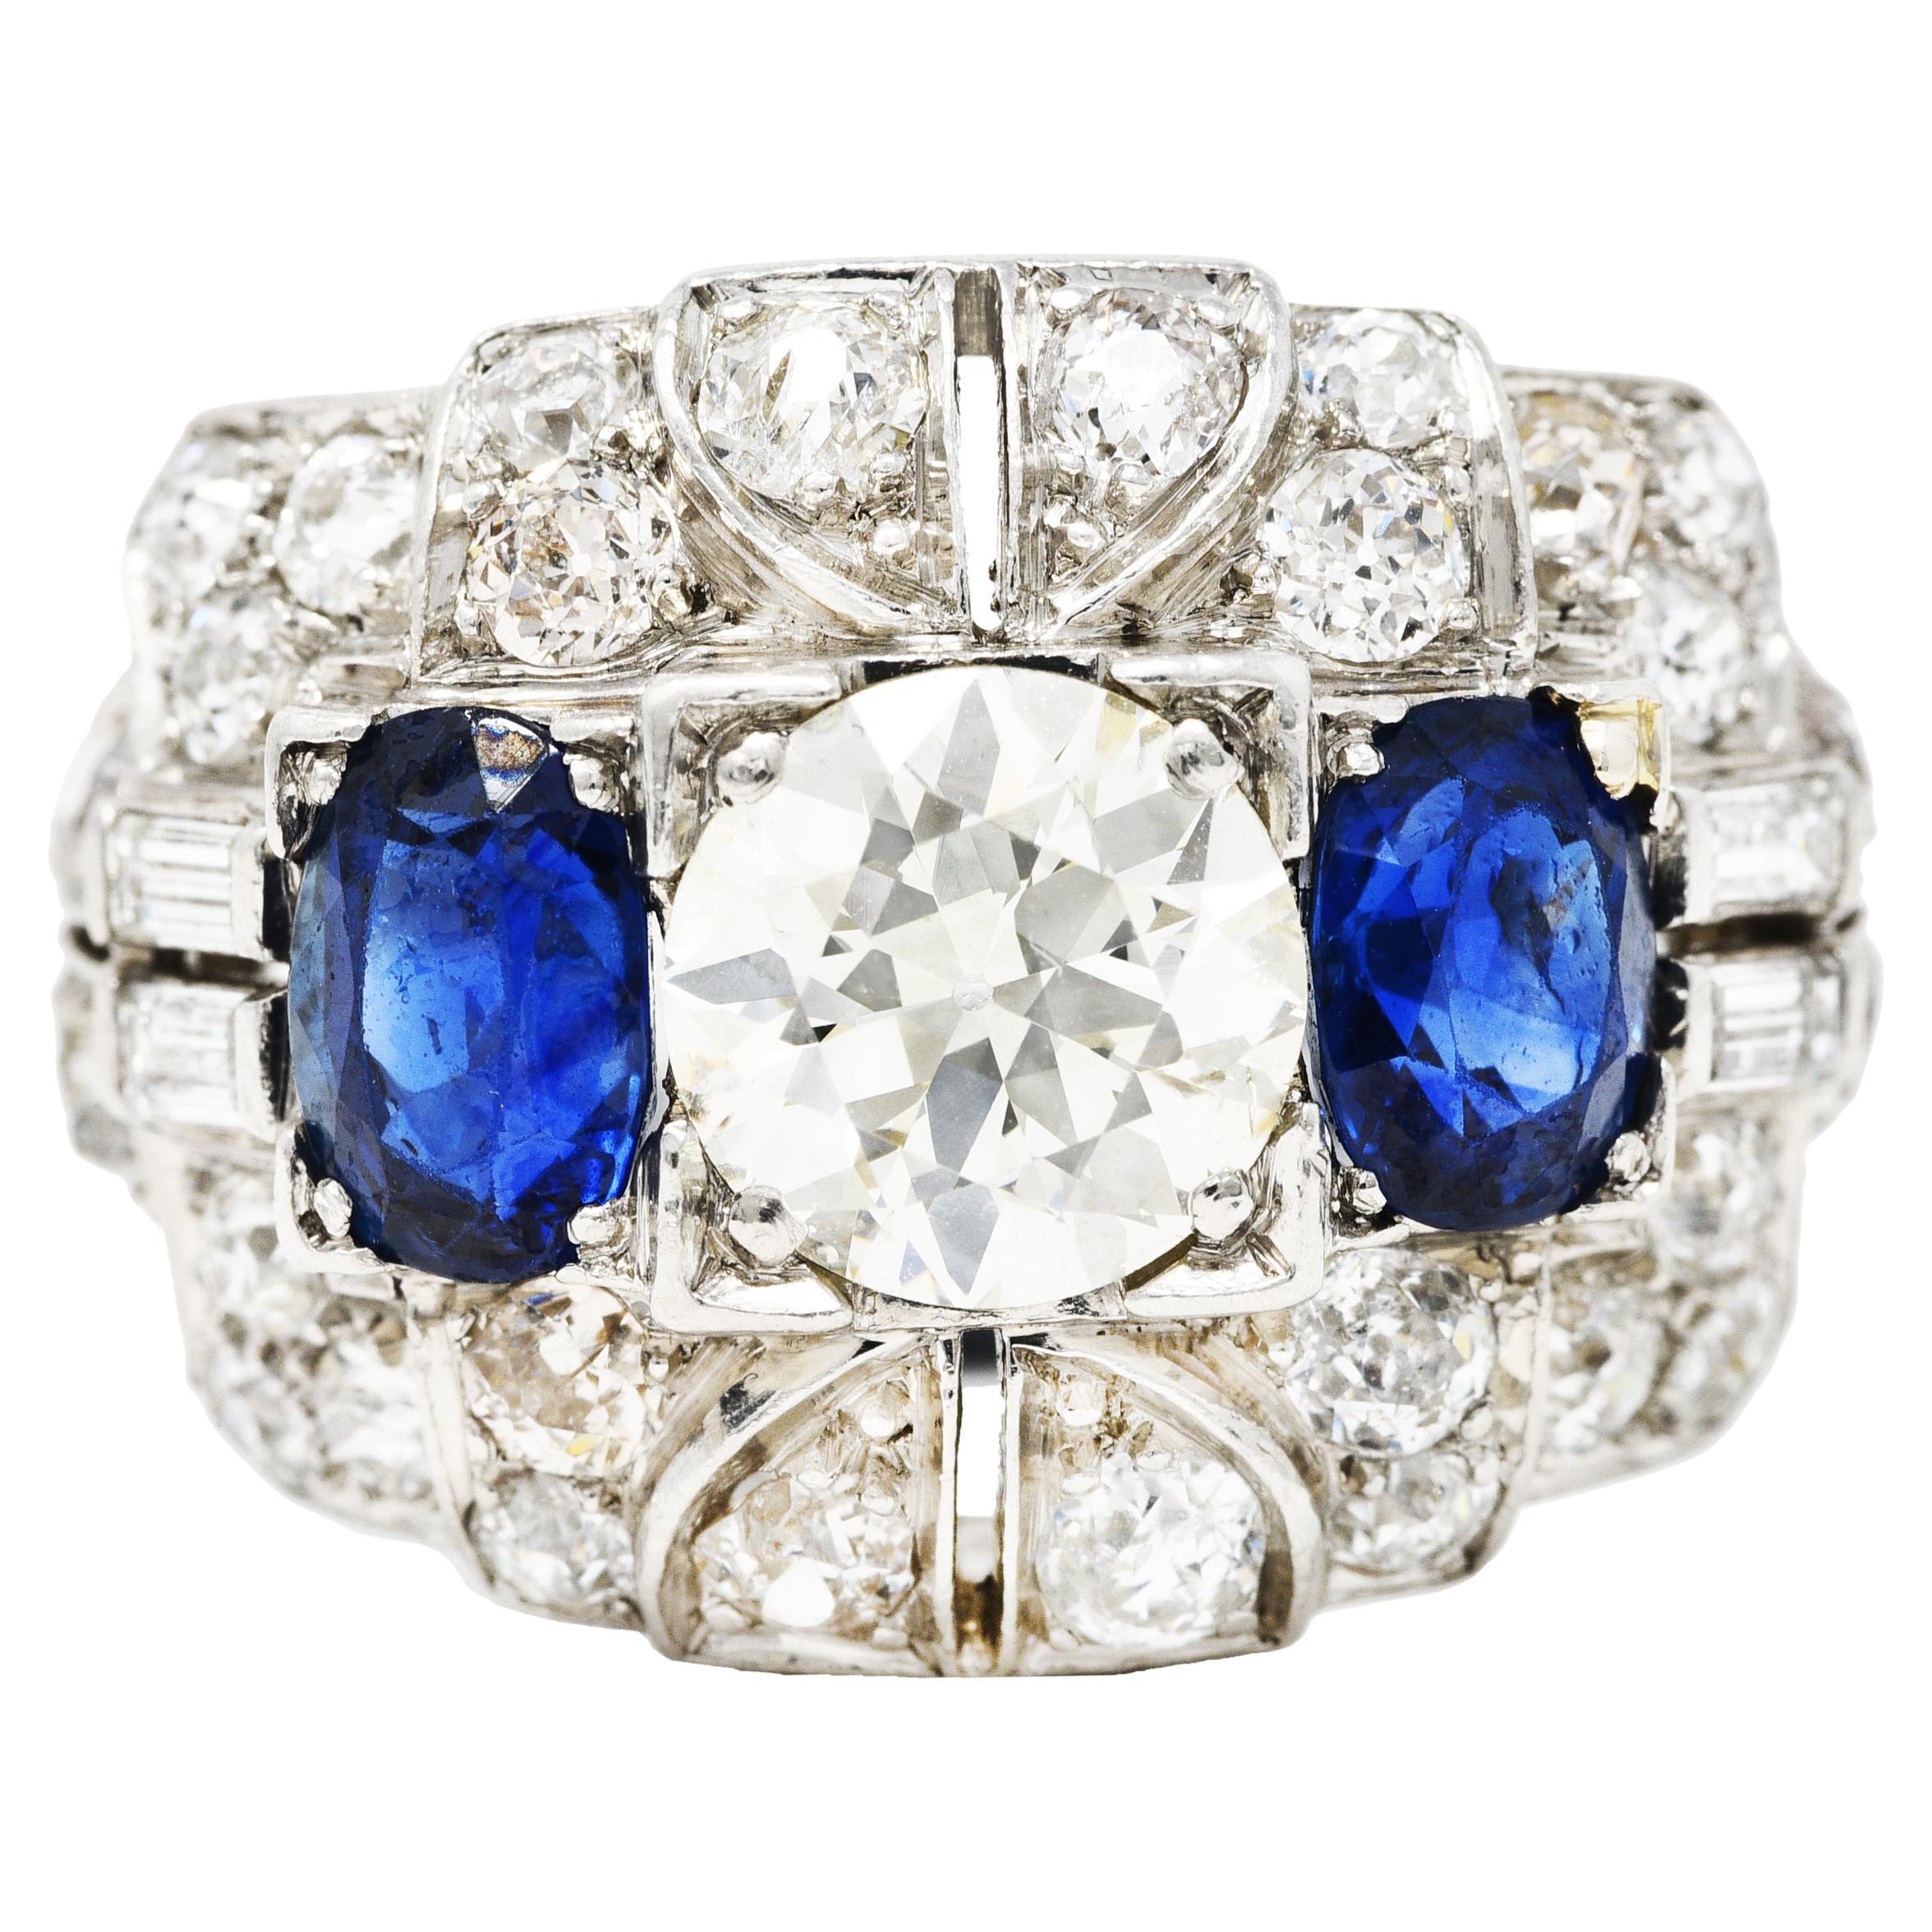 Domed bombè band ring is comprised of undulating geometric forms. Centering an old European cut diamond weighing approximately 1.61 carats - K color with SI1 clarity. Set low in a square form head and flanked by two oval cut sapphires. Very well